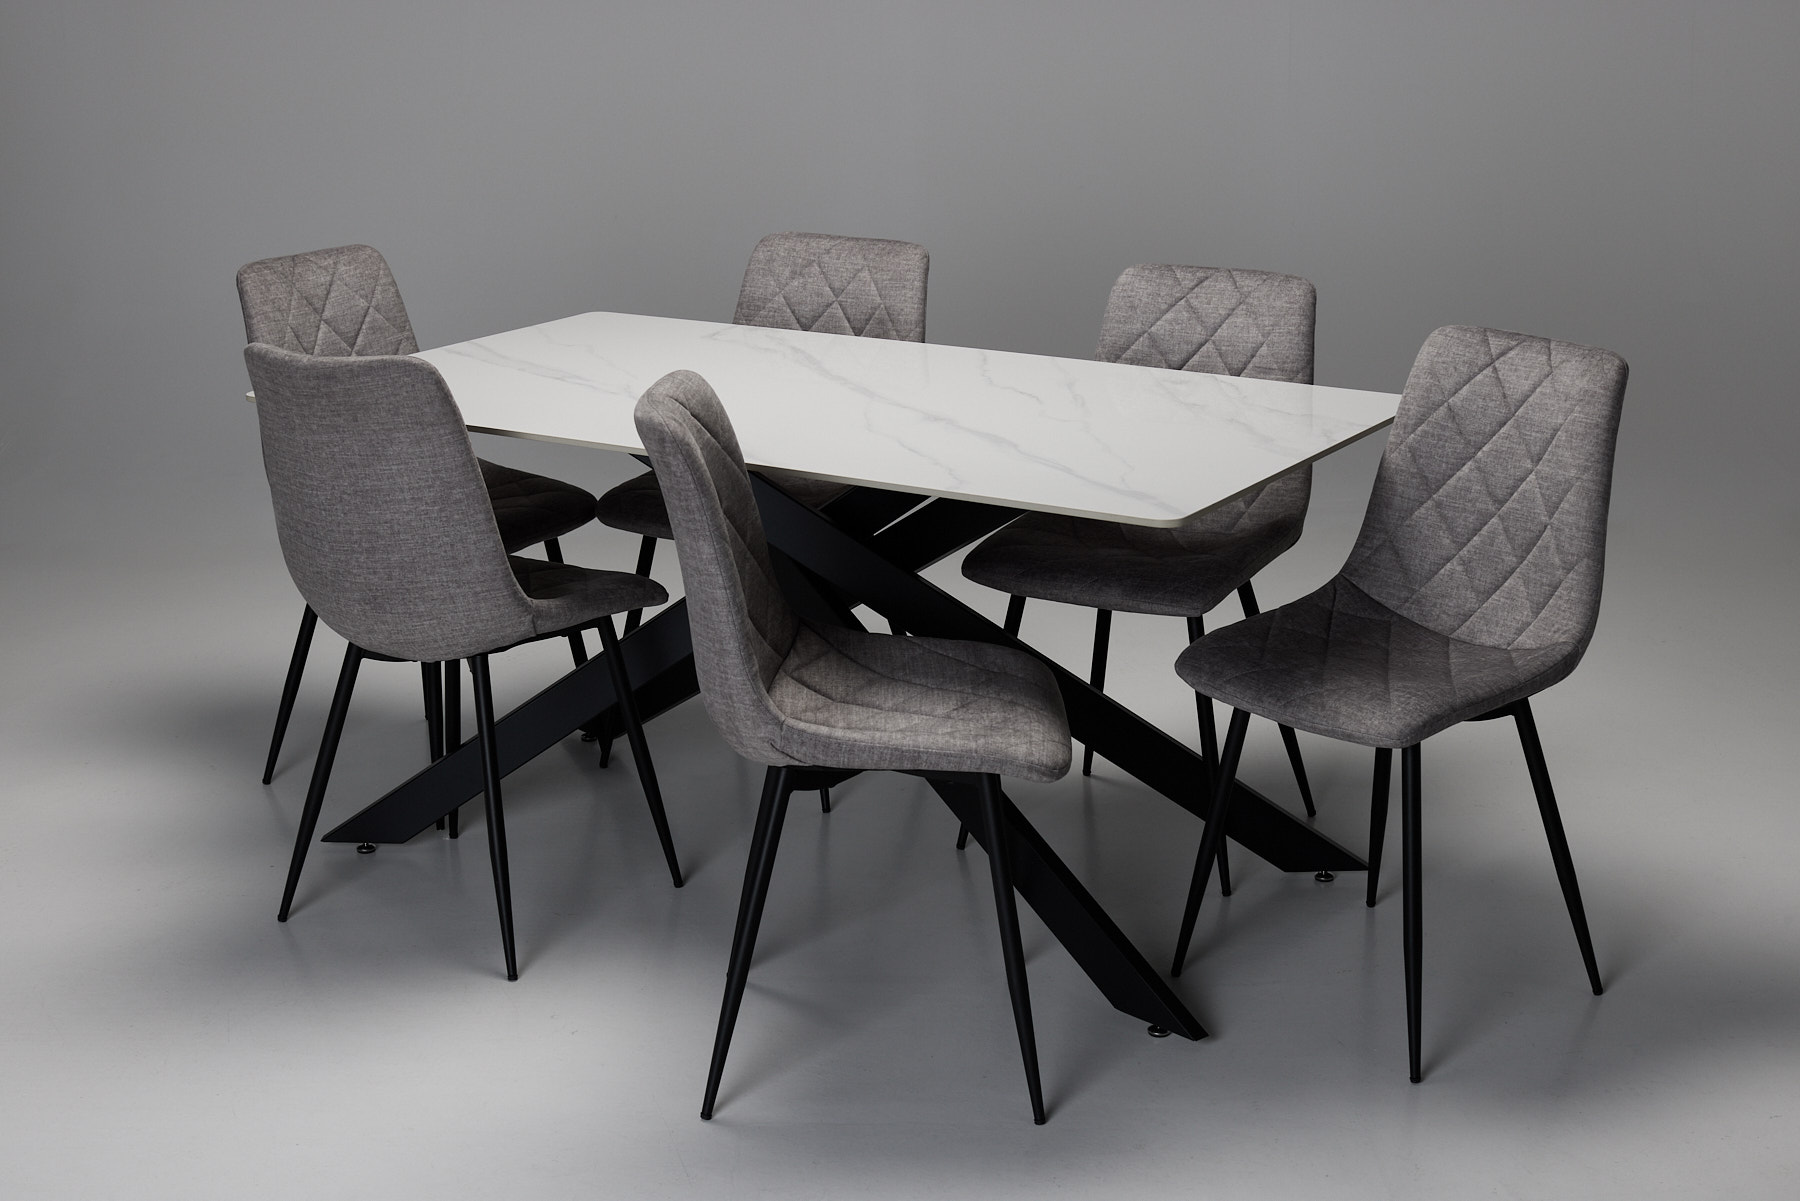 Cassis & Bari Dining Set - 1.6m Lincoln White Stone Dining Table with 6 Light Grey Velvet Dining Chairs